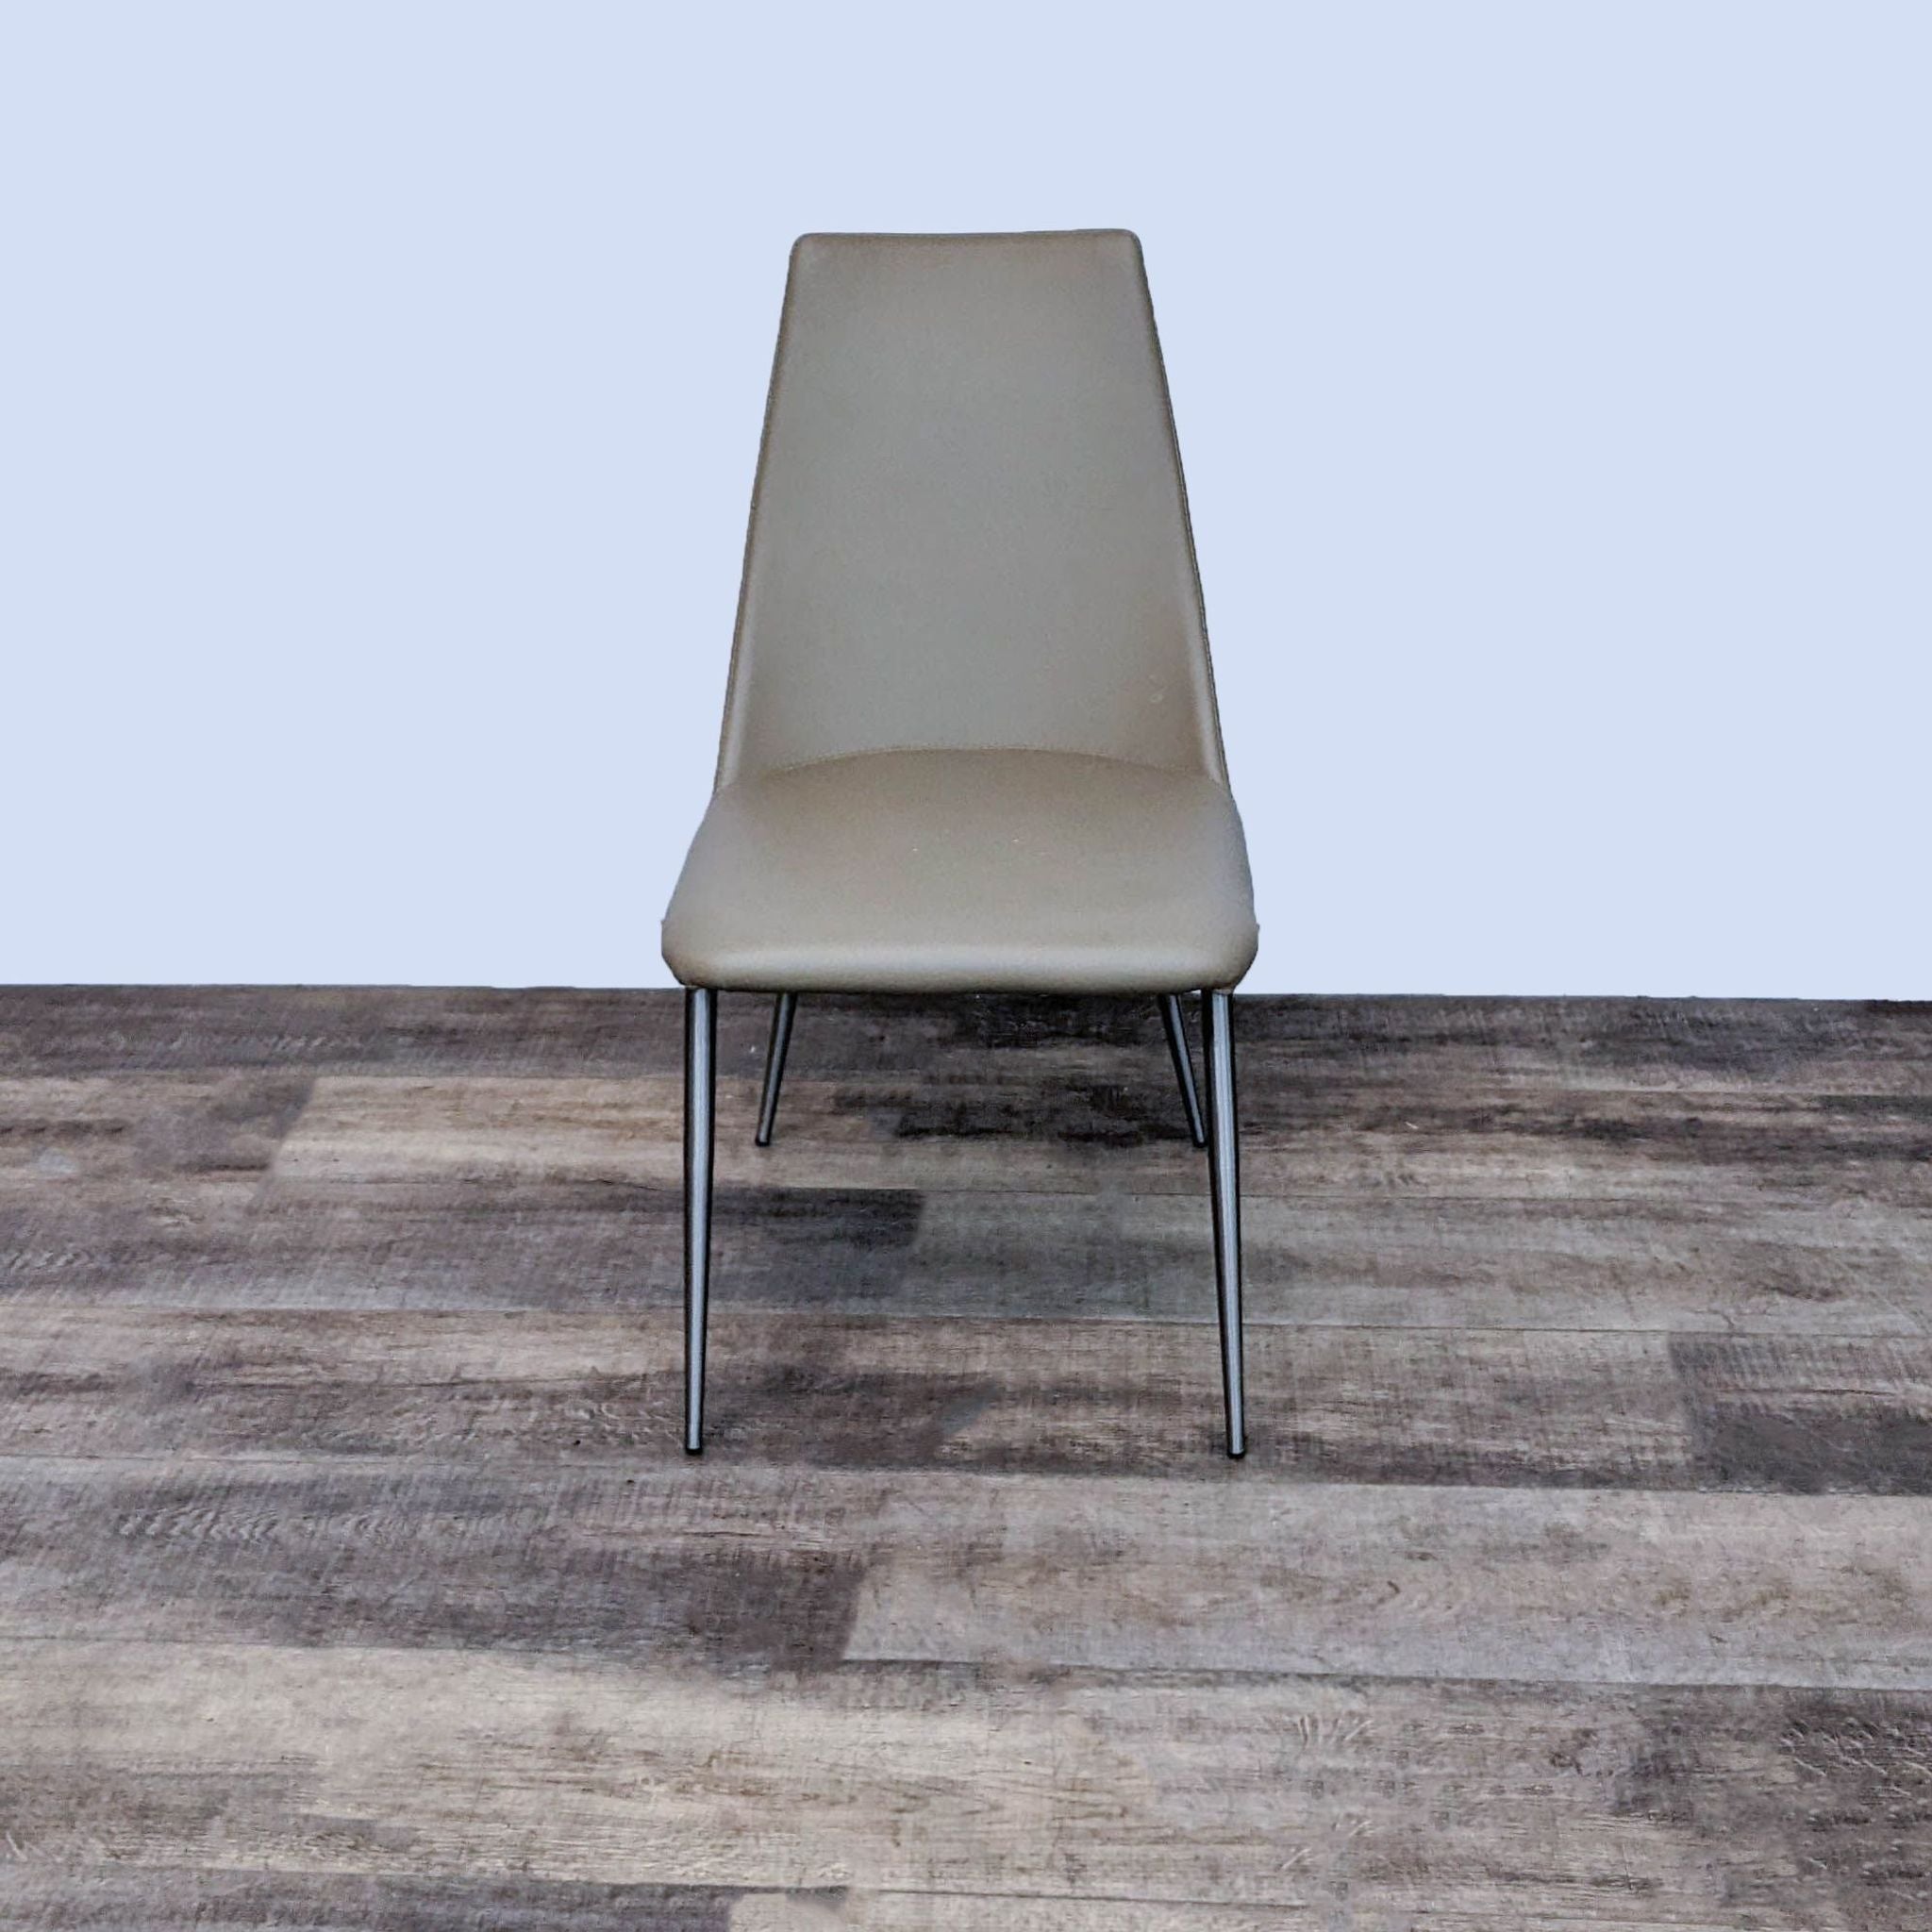 Alt text 1: Zuo Modern Whisp dining chair with a taupe leatherette seat and slim chrome legs against a wood-effect floor.